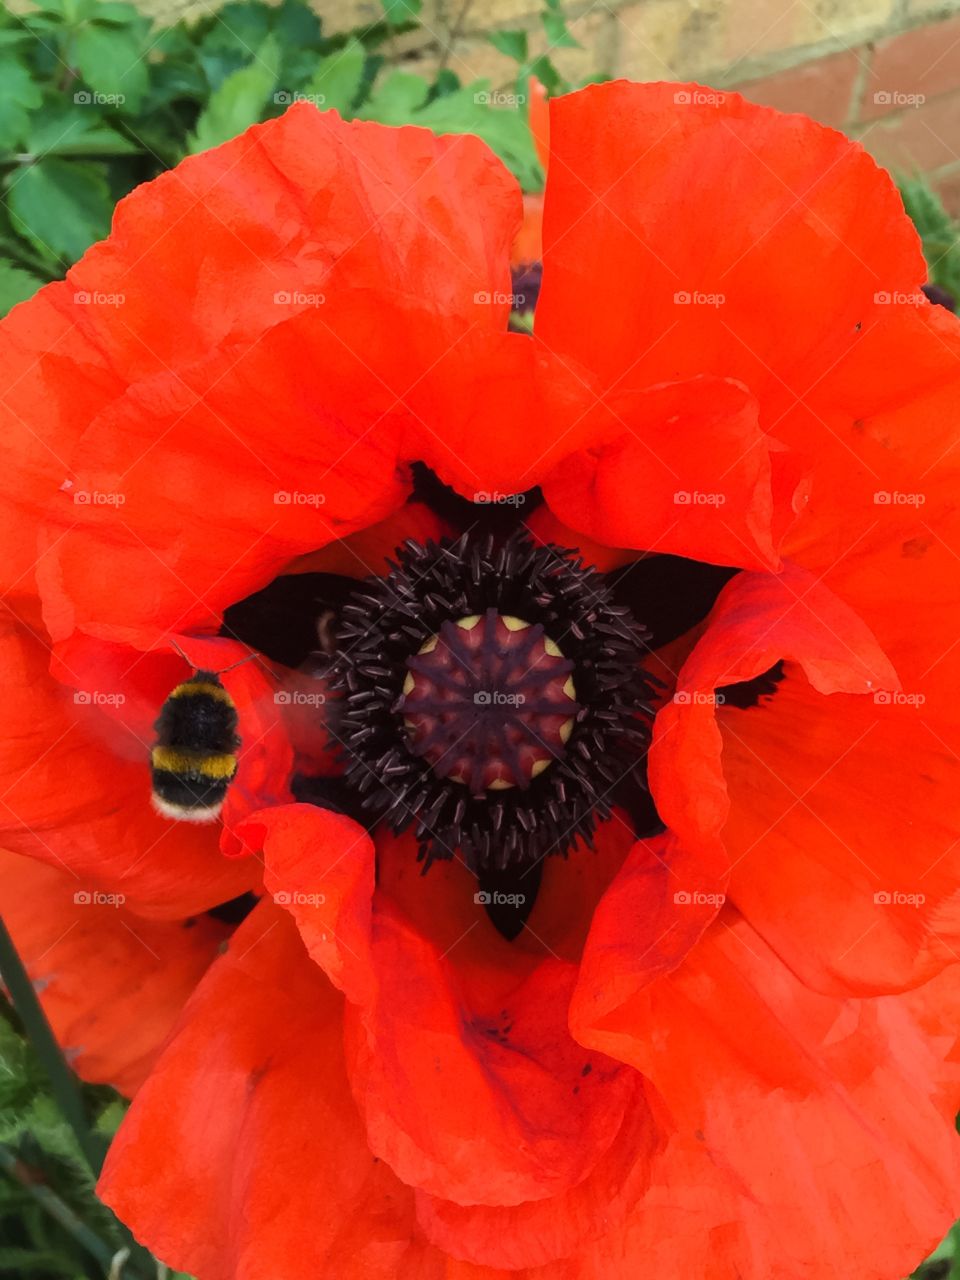 A bee approaching and debating whether to land on the stamen of a large-sized red poppy.